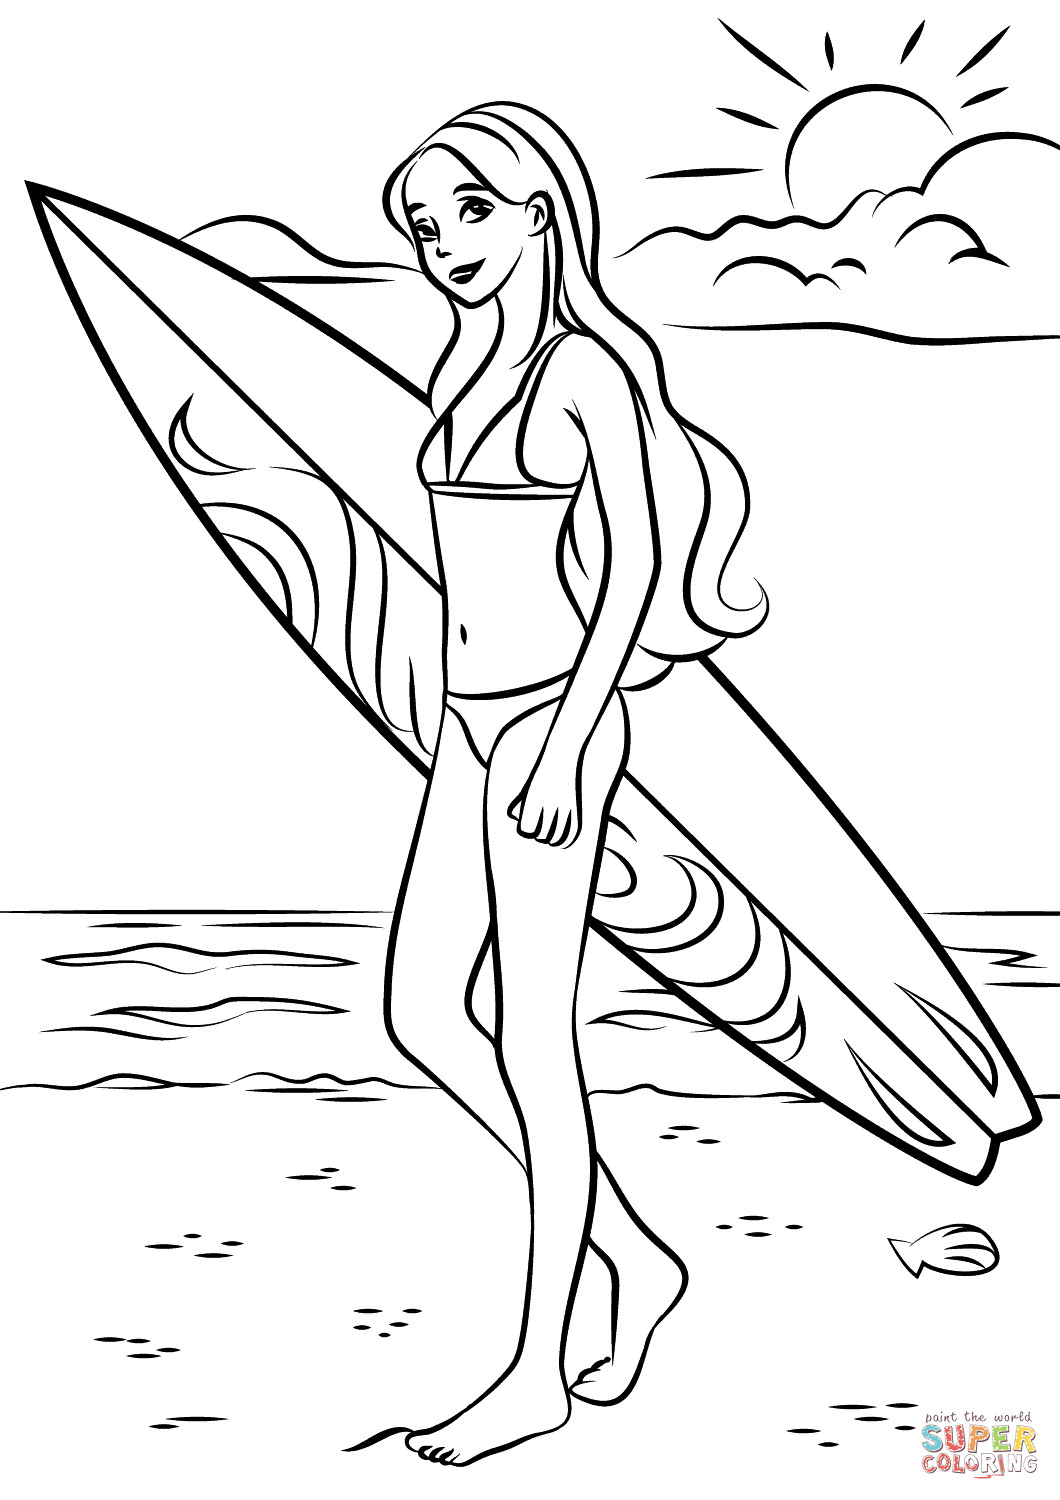 Girl Surfing Coloring Pages
 Barbie Surfer coloring page